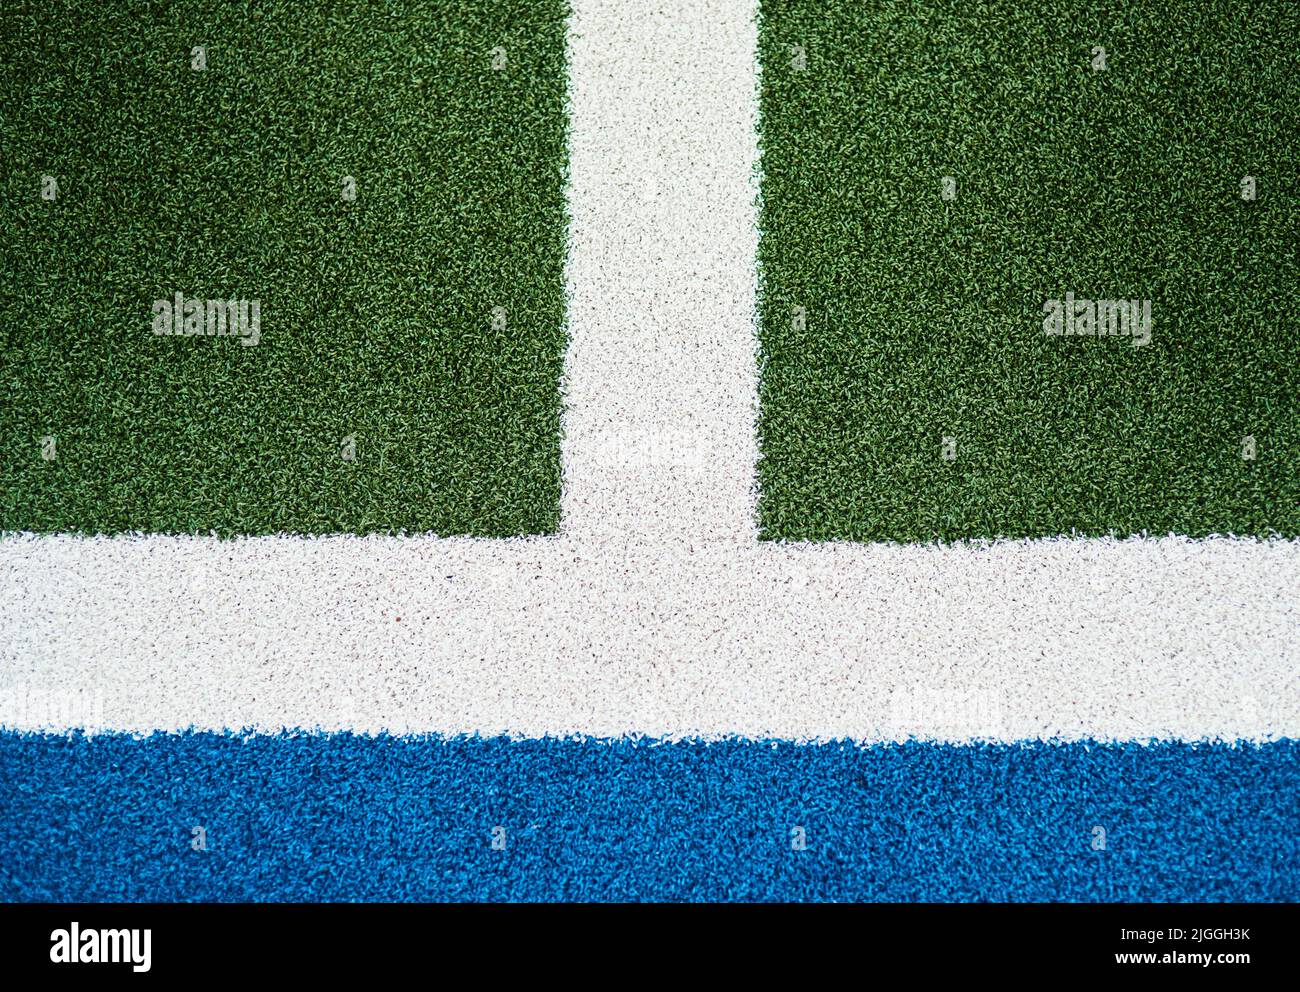 Its a great day for hockey. Closeup shot of markings on a hockey field. Stock Photo